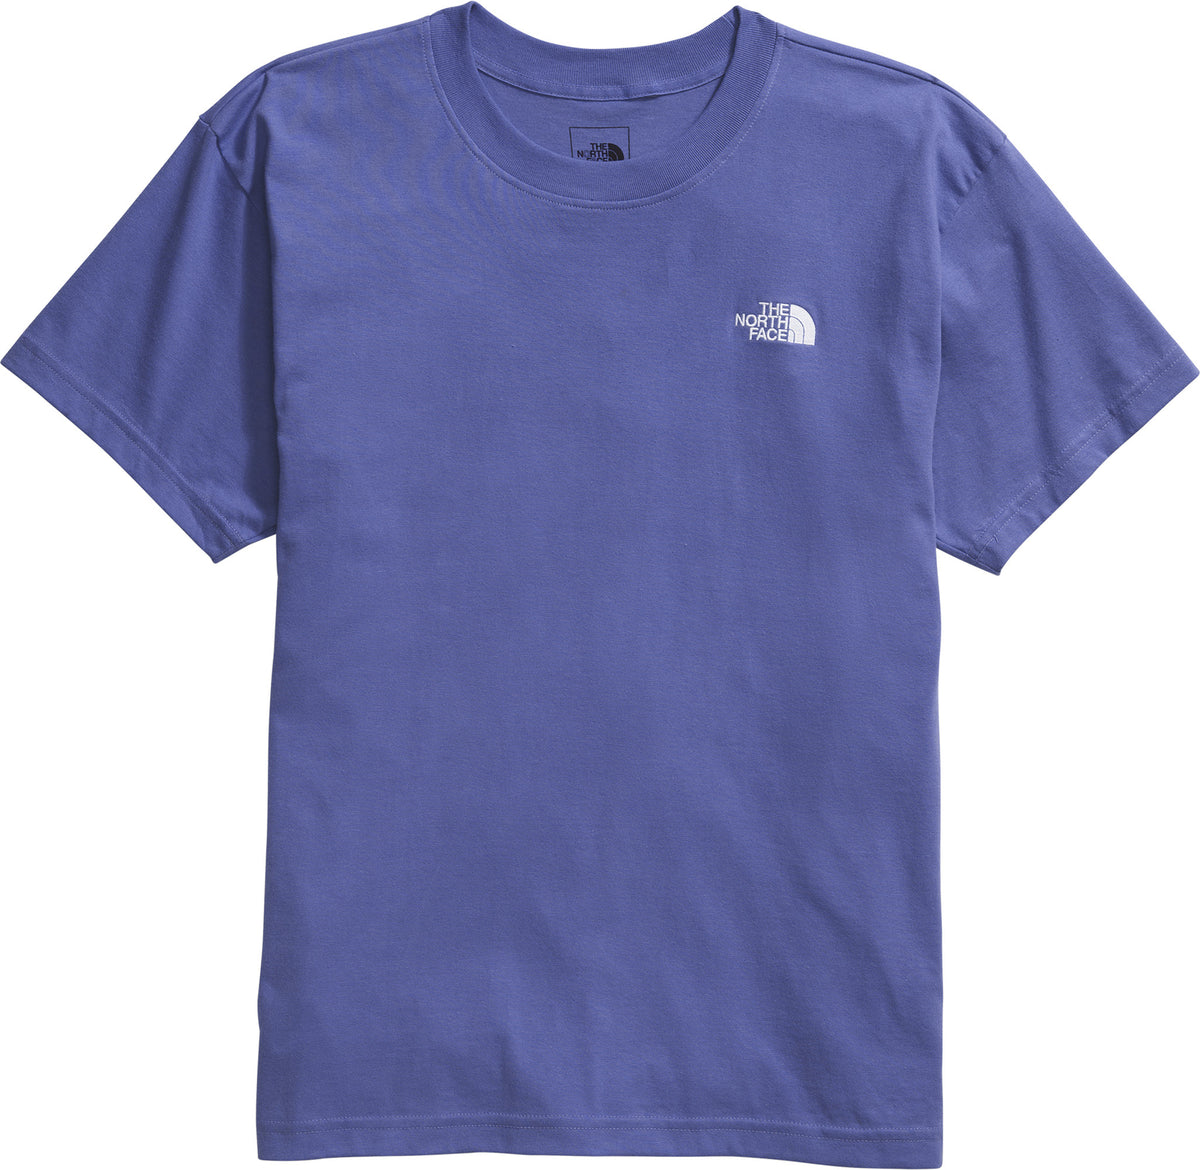 The North Face Short Sleeve Evolution Box Fit T-shirt - Men's